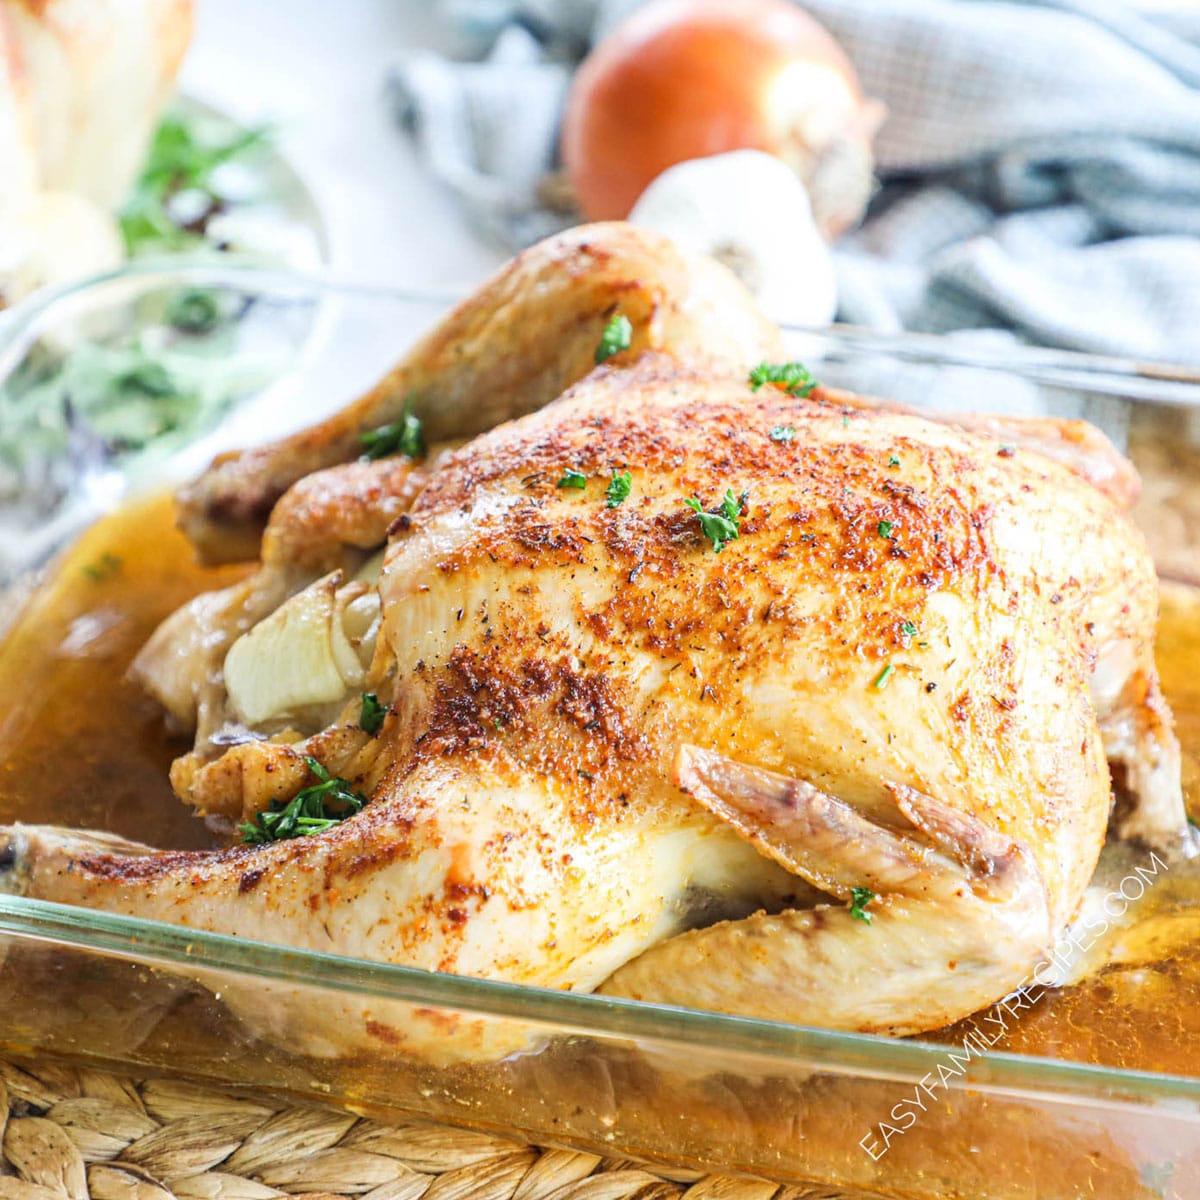 Baked Rotisserie Chicken made in the Oven